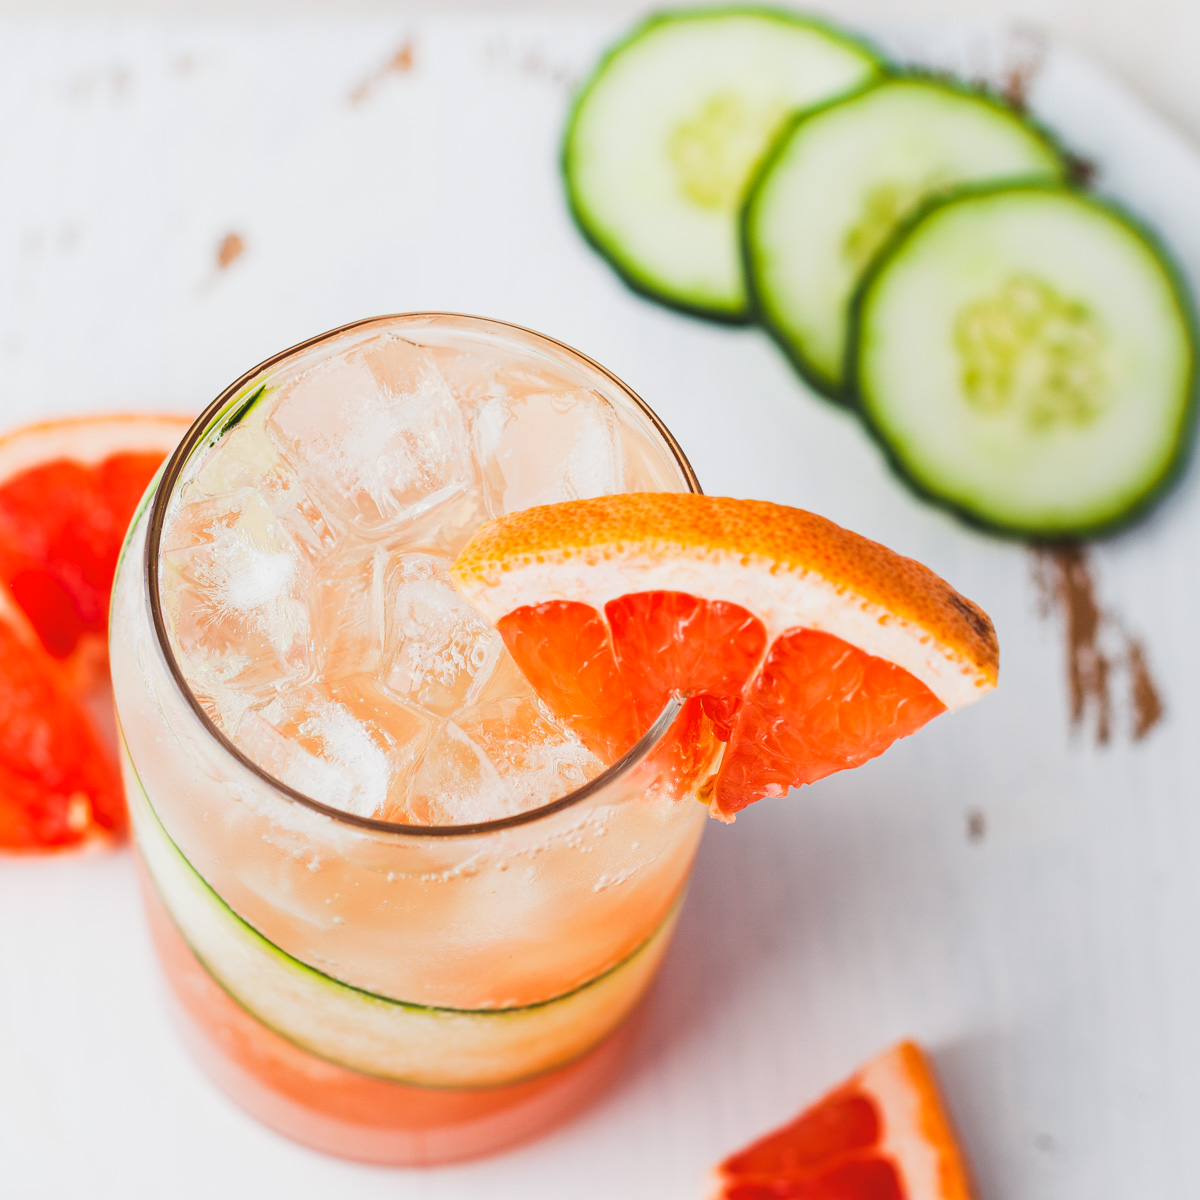 A cocktail glass lined with a thin slice of cucumber and filled with ice and pink grapefruit cocktail with a small wedge of grapefruit as a garnish.